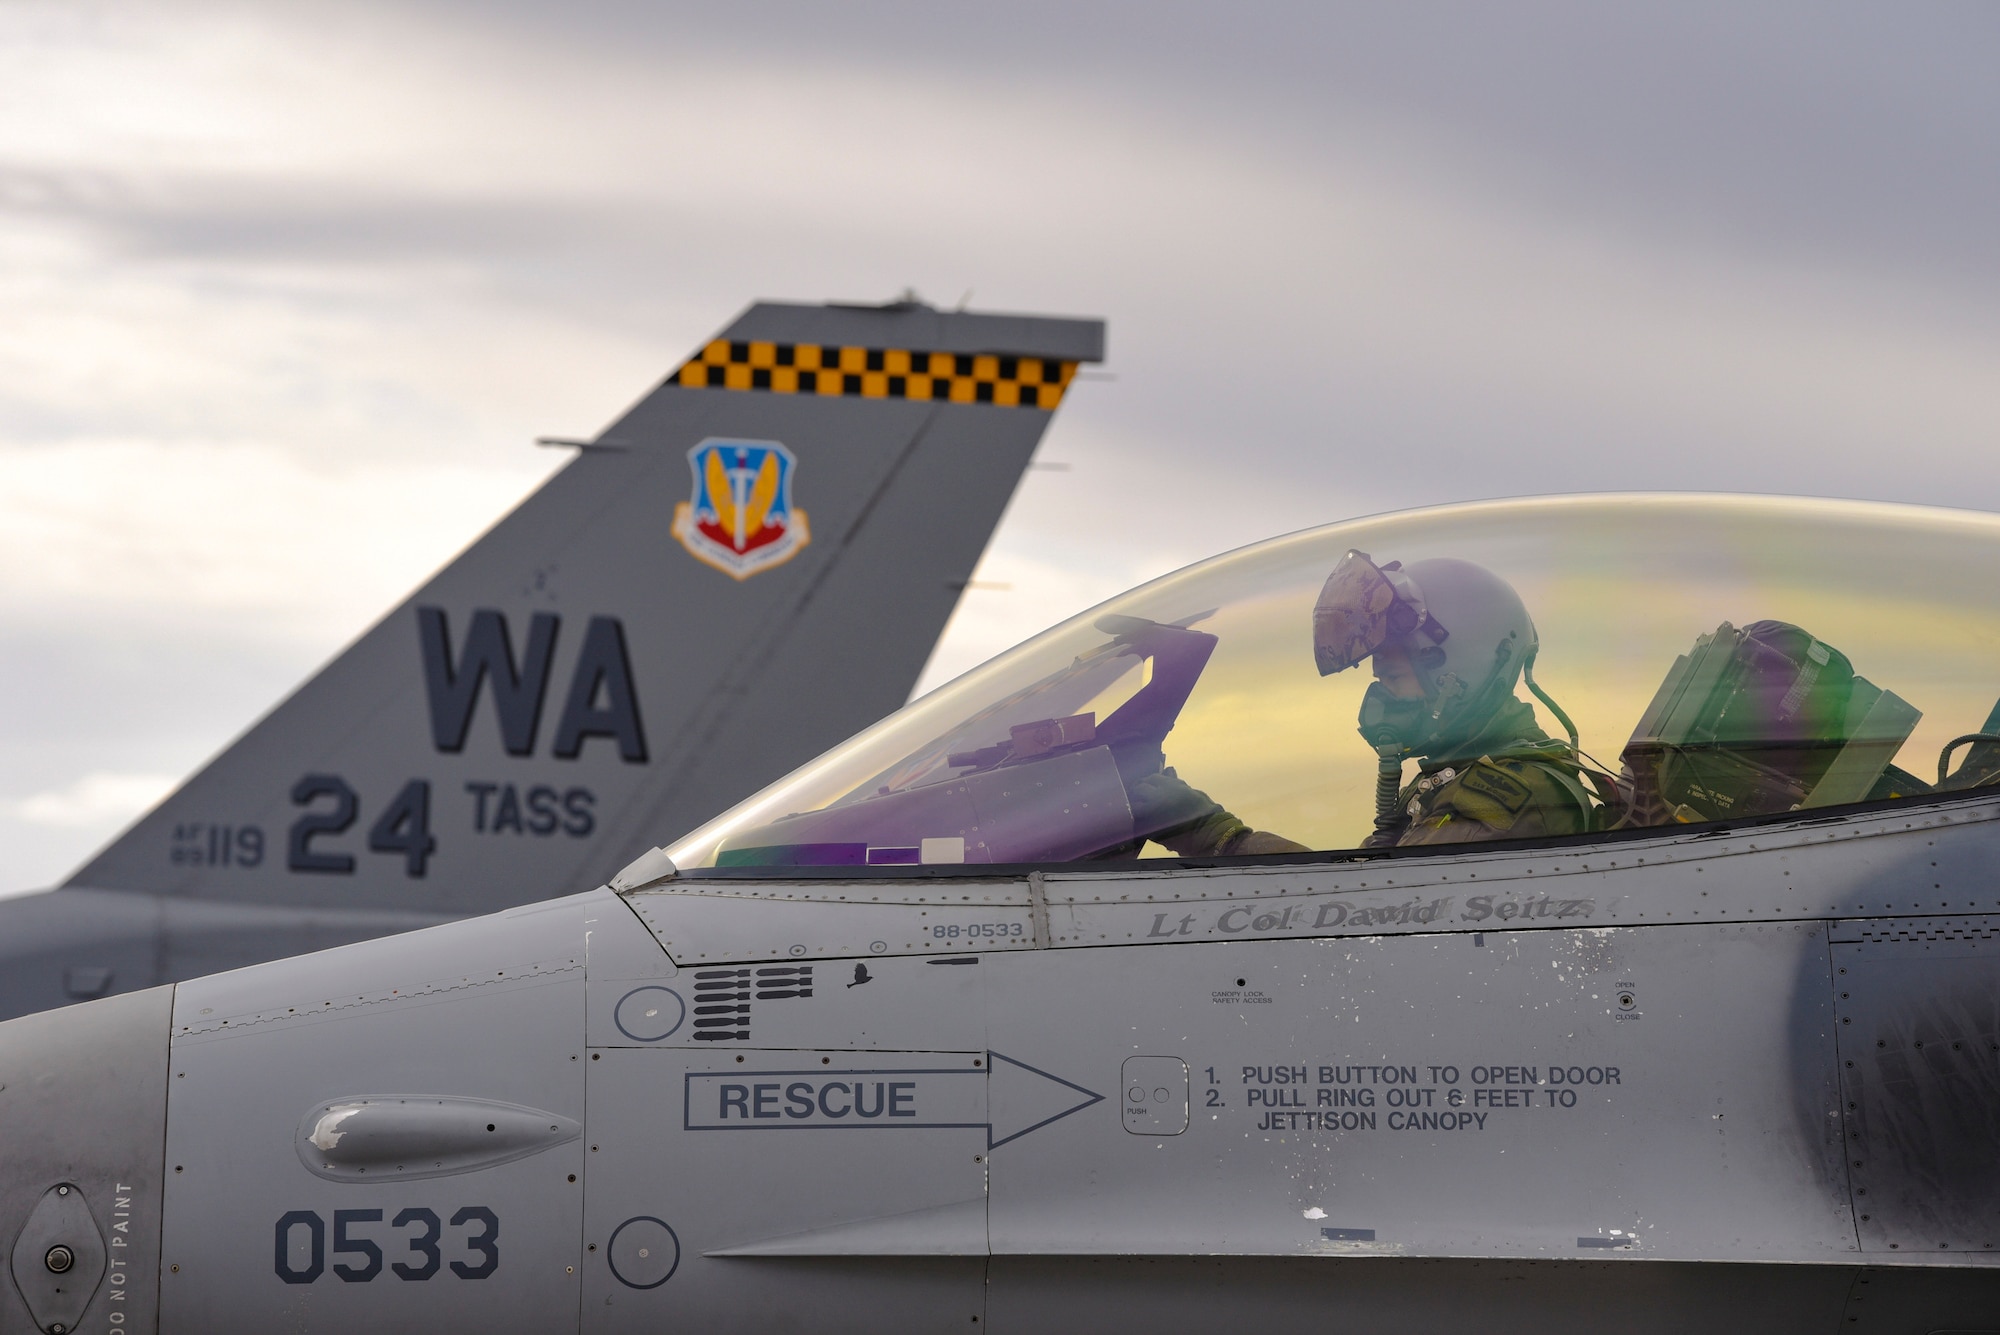 Lt. Col. Daniel McGuire, 57th Wing fighter pilot, sits in the cockpit of an F-16 Fighting Falcon fighter jet assigned to the 24th Tactical Air Support Squadron at Nellis Air Force Base, Nevada, Feb. 27, 2018. The 24th TASS will fly F-16s and focus solely on overcoming air-to-ground adversaries. (U.S. Air Force photo by Airman 1st Class Andrew D. Sarver)